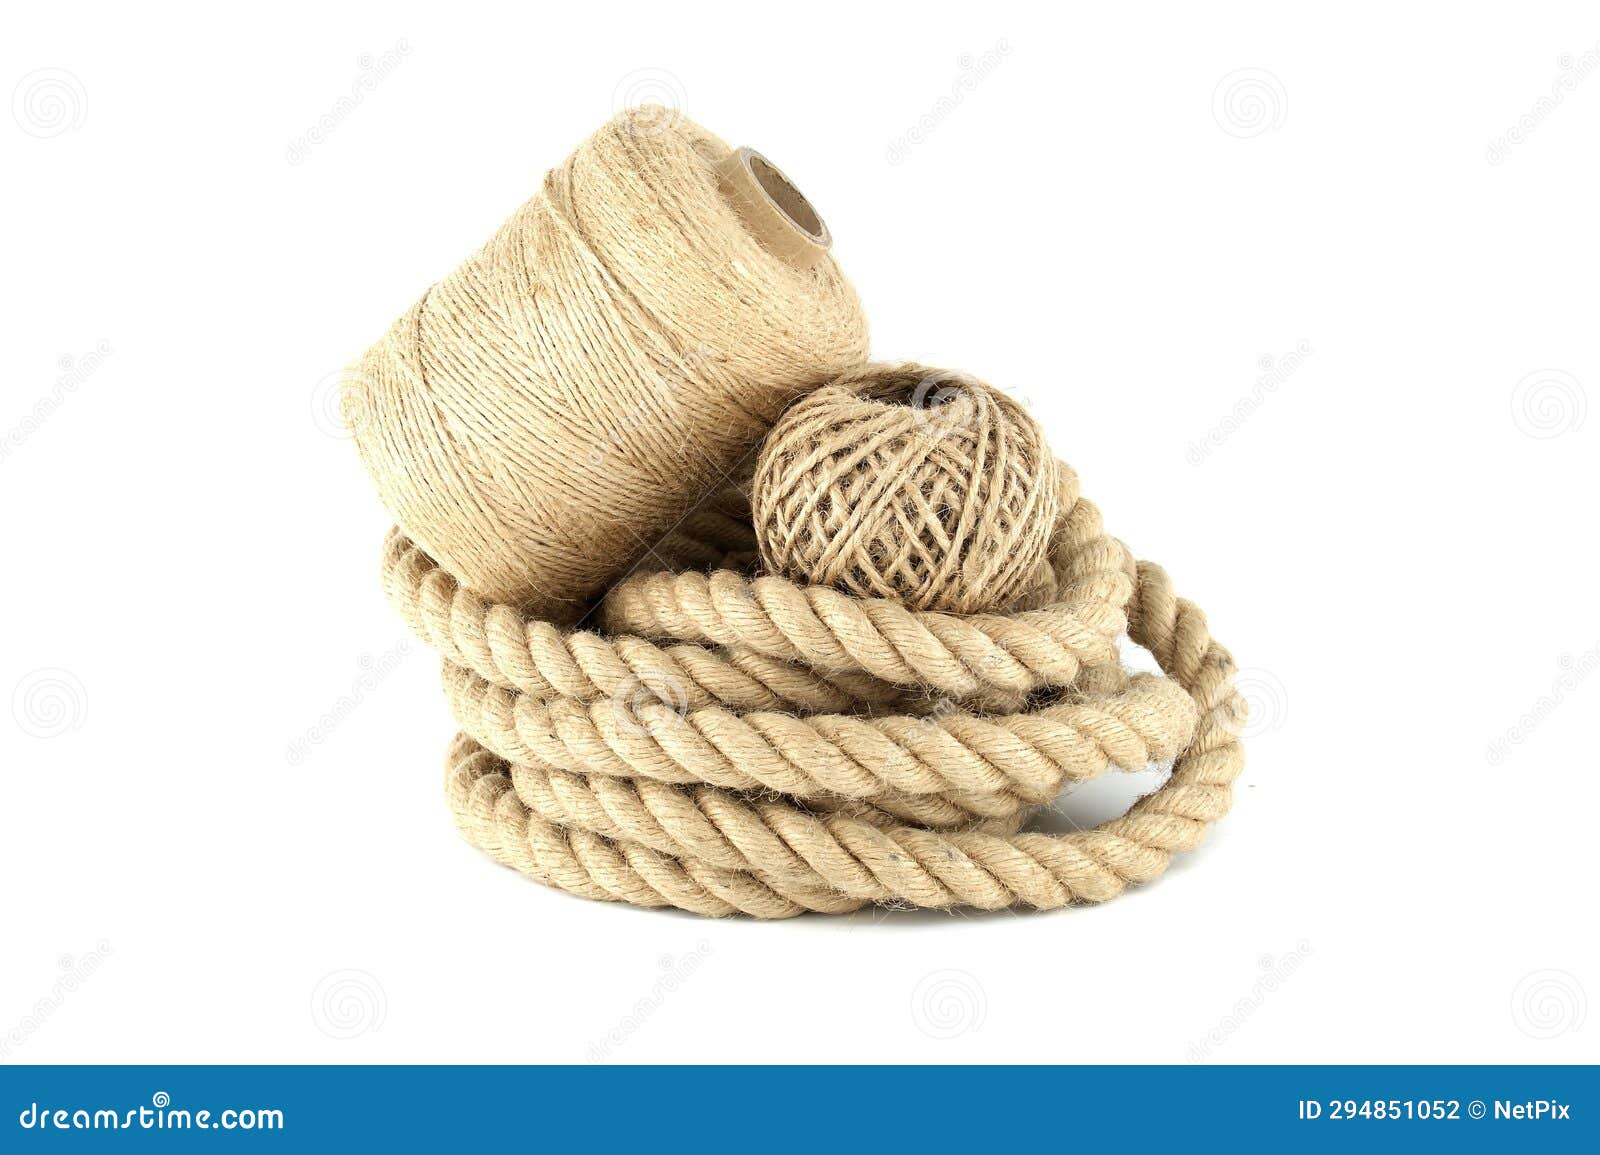 https://thumbs.dreamstime.com/z/thick-strong-jute-rope-twine-spools-white-closeup-view-coiled-brown-twisted-isolated-background-294851052.jpg